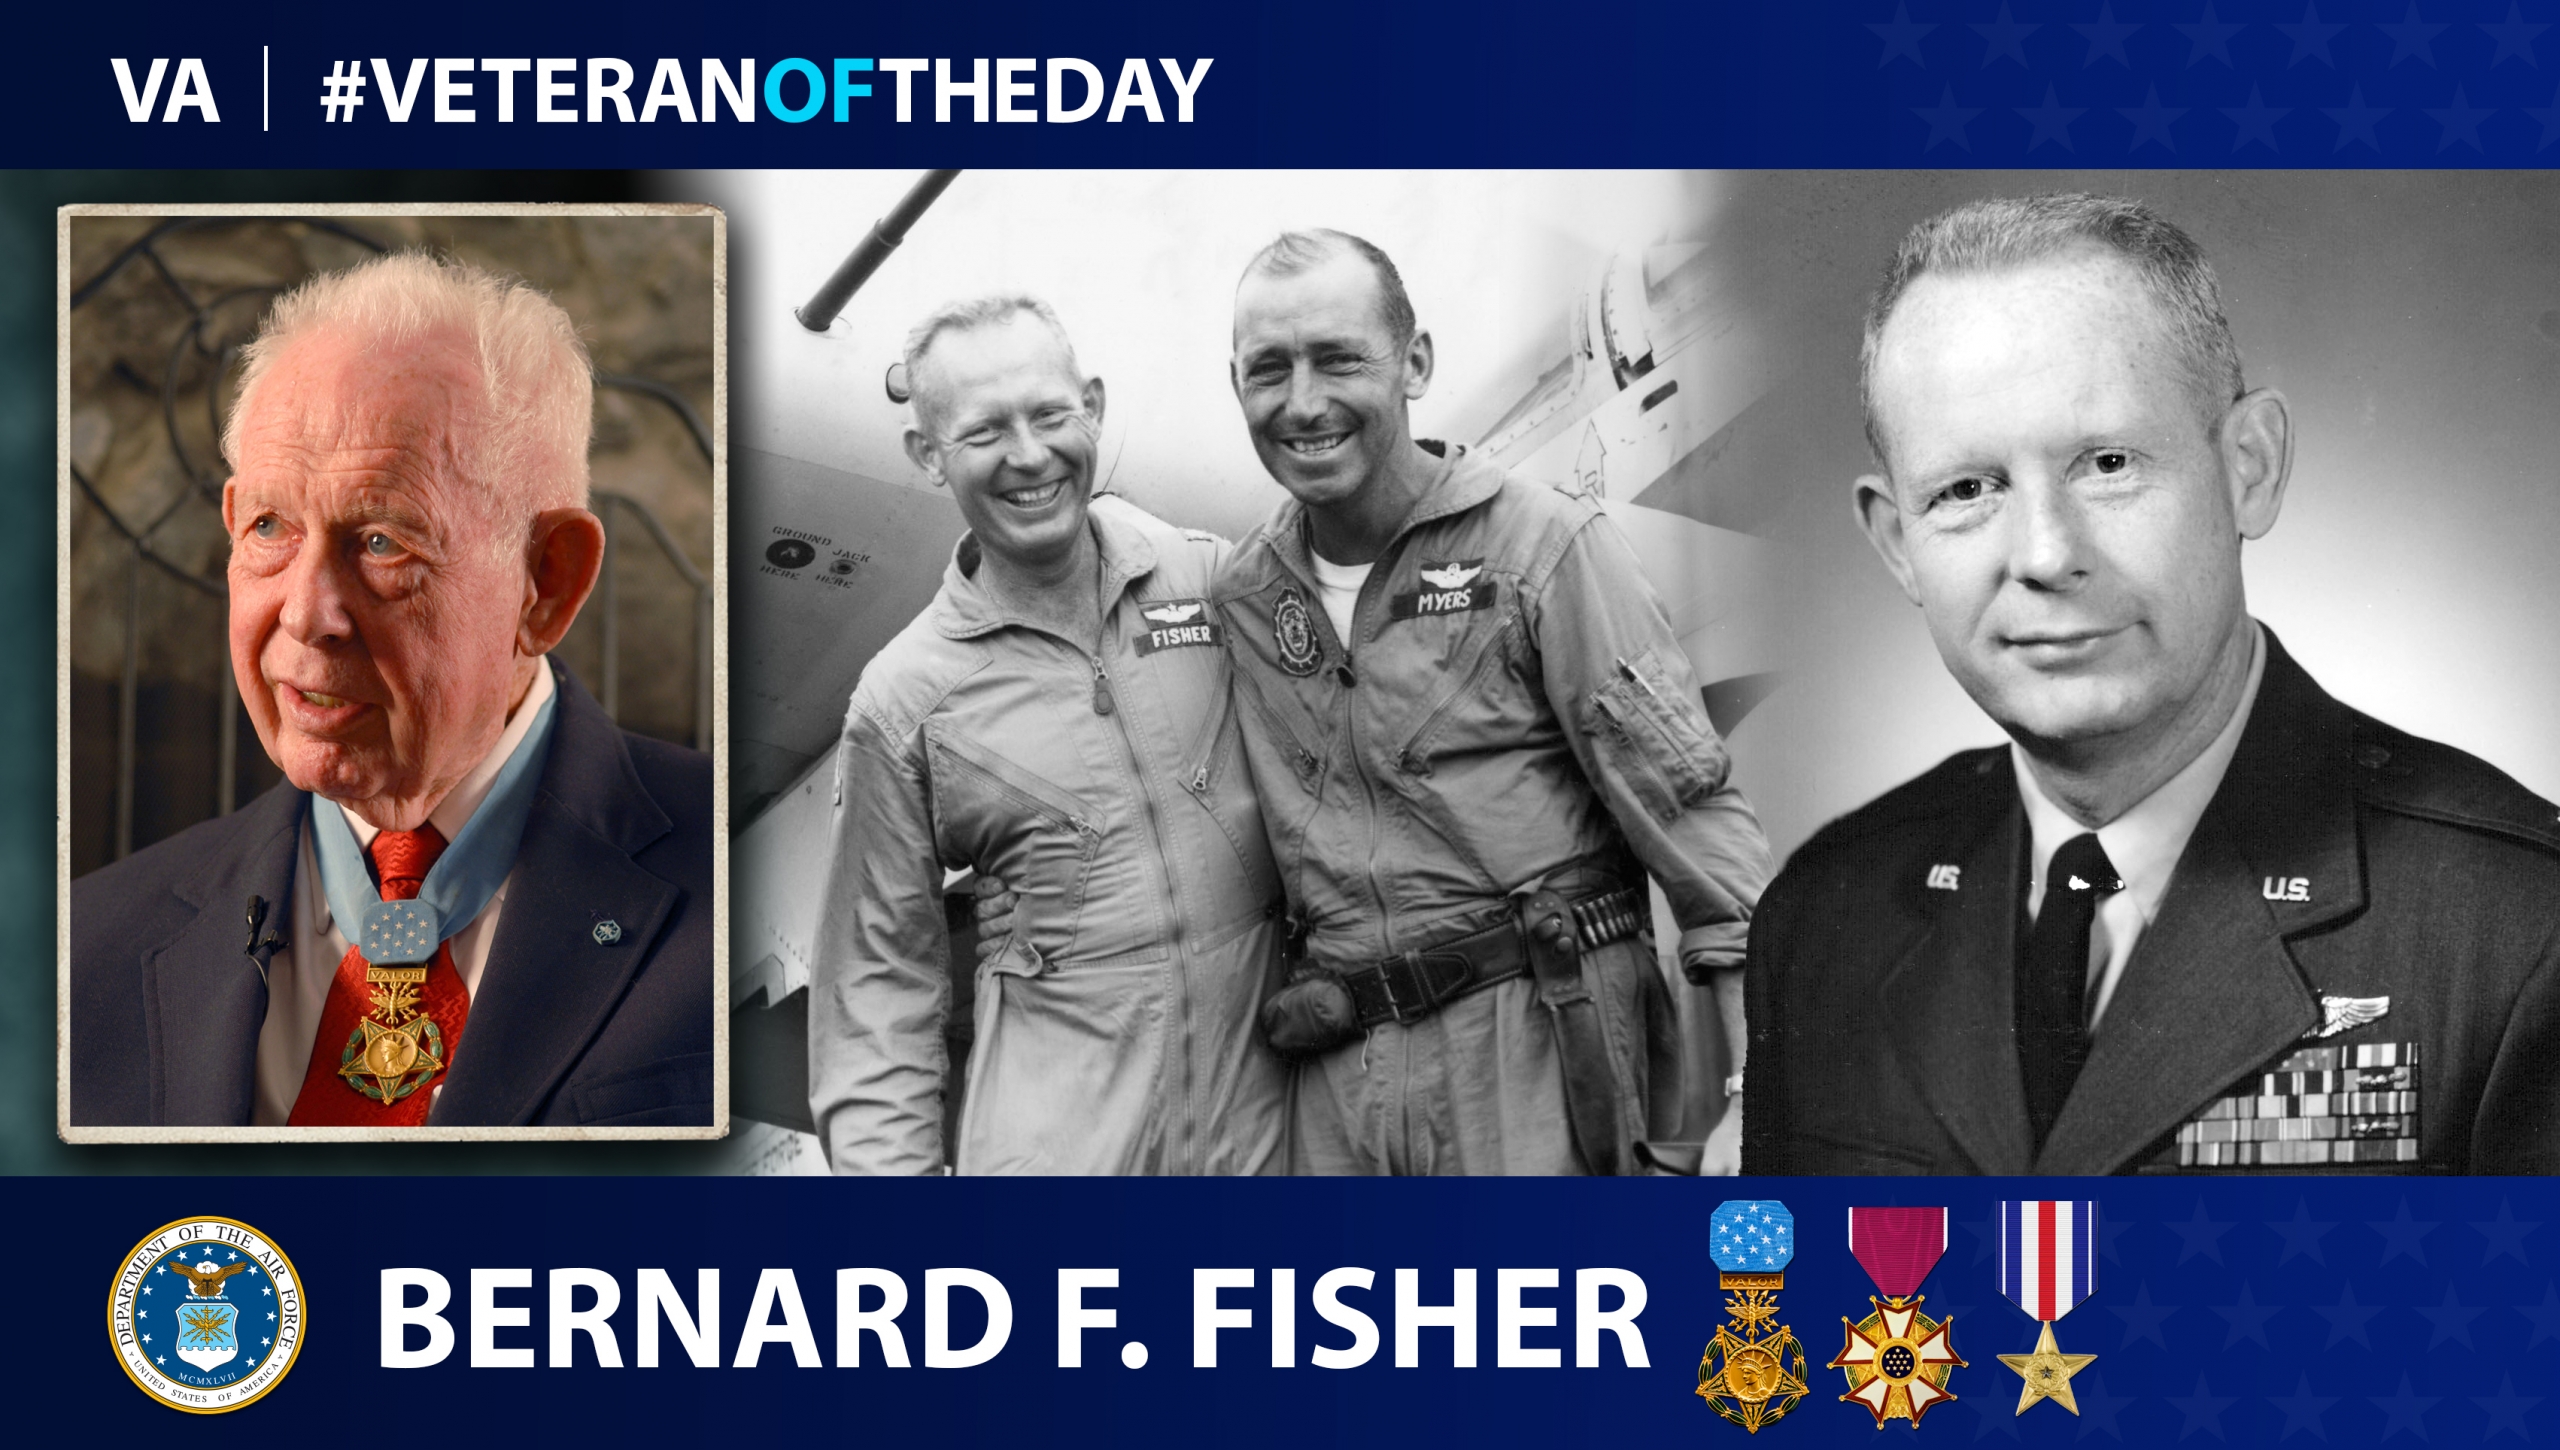 Air Force Veteran Bernard F. Fisher is today’s Veteran of the Day.